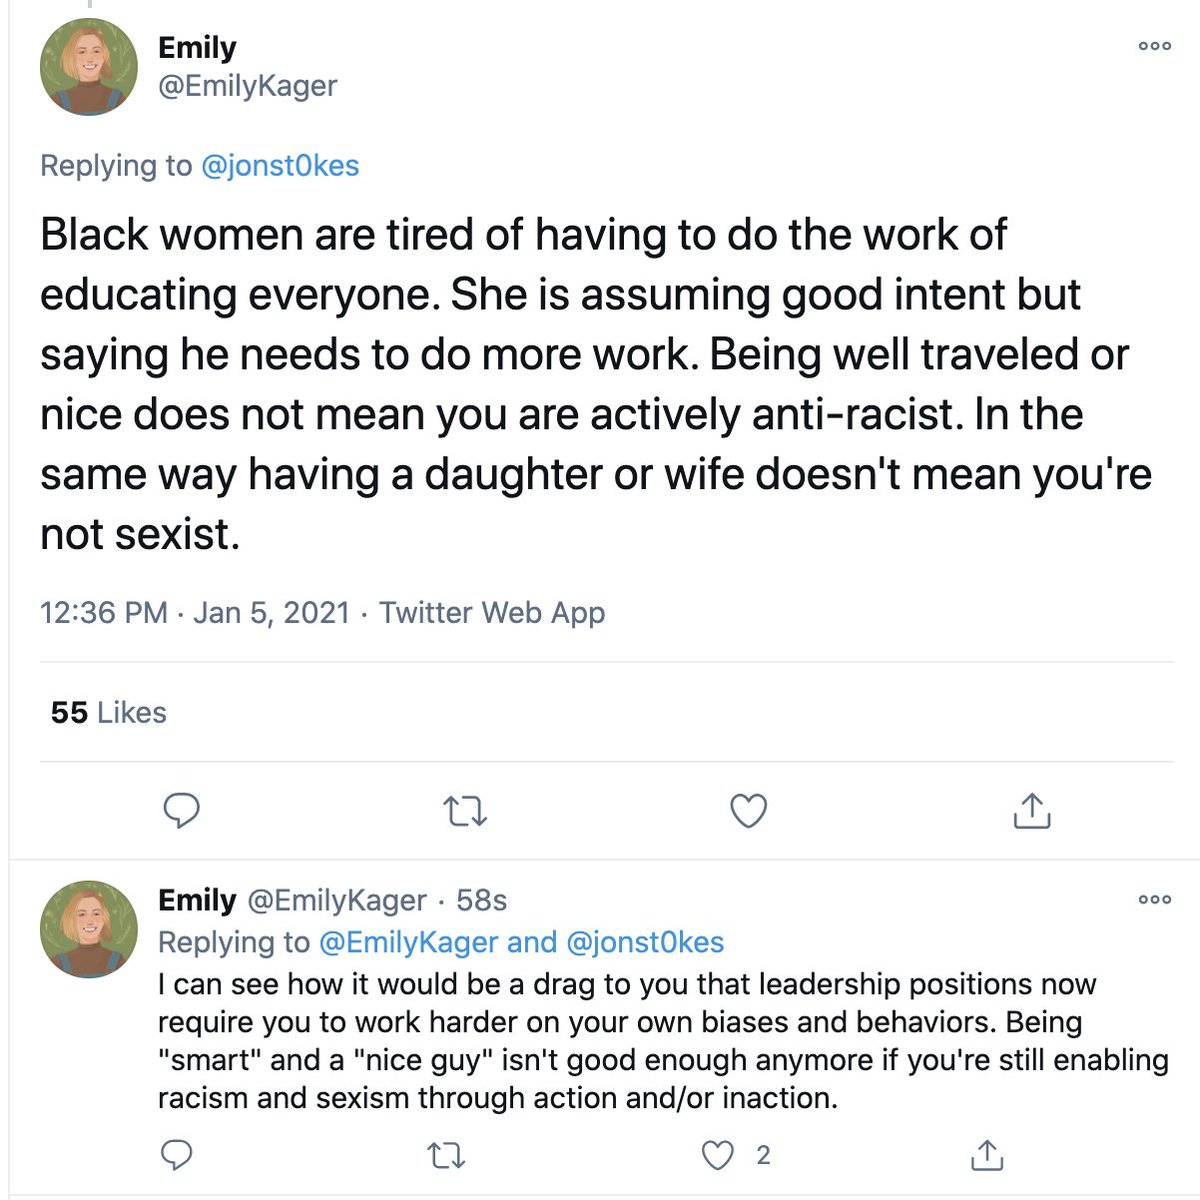 This is an amazing pair of tweets so I'm going to talk about them, & I'll do so in a way that's authentic to me but that may turn some followers off. So if this isn't your jam then I totally get it. I don't often speak this way but I'll do so, here.  https://twitter.com/EmilyKager/status/1346526049983631360